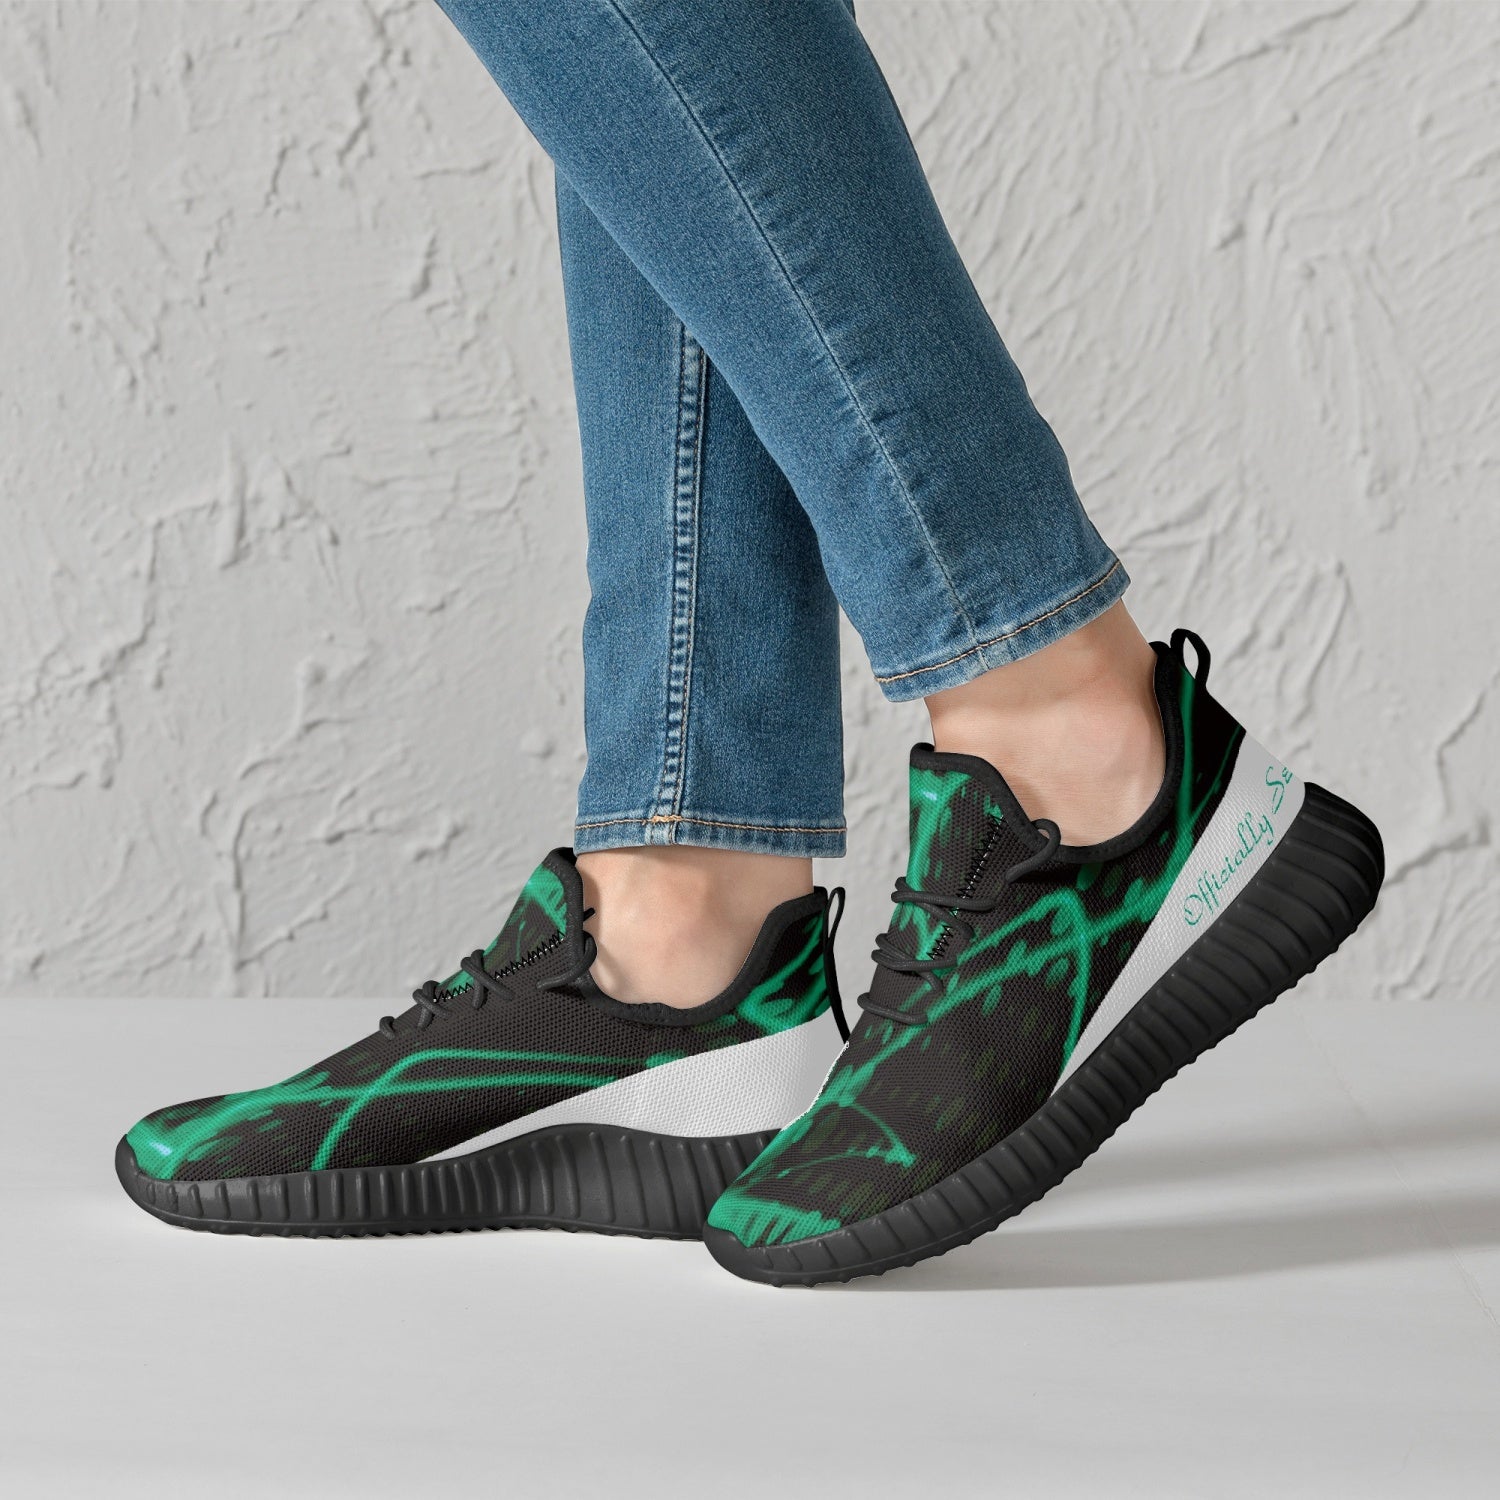 Officially Sexy Baby Mint & White Laser Print Mesh Knit Sneakers - With White or Black Sole